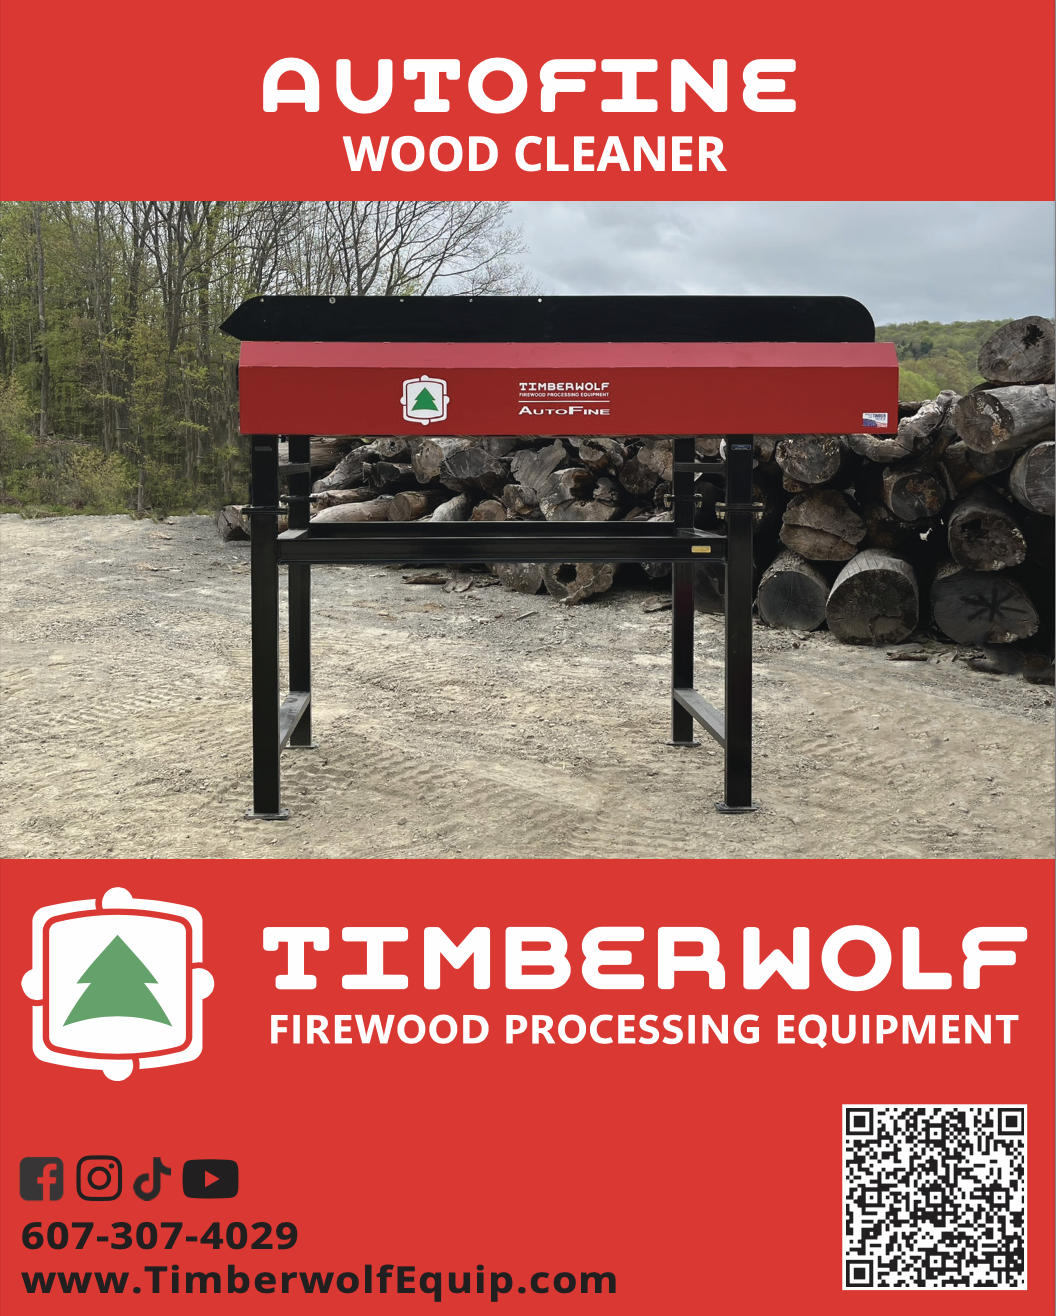 Timberwolf Firewood Processing Equipment AutoFine Wood Cleaner Technical Specifications Brochure Download